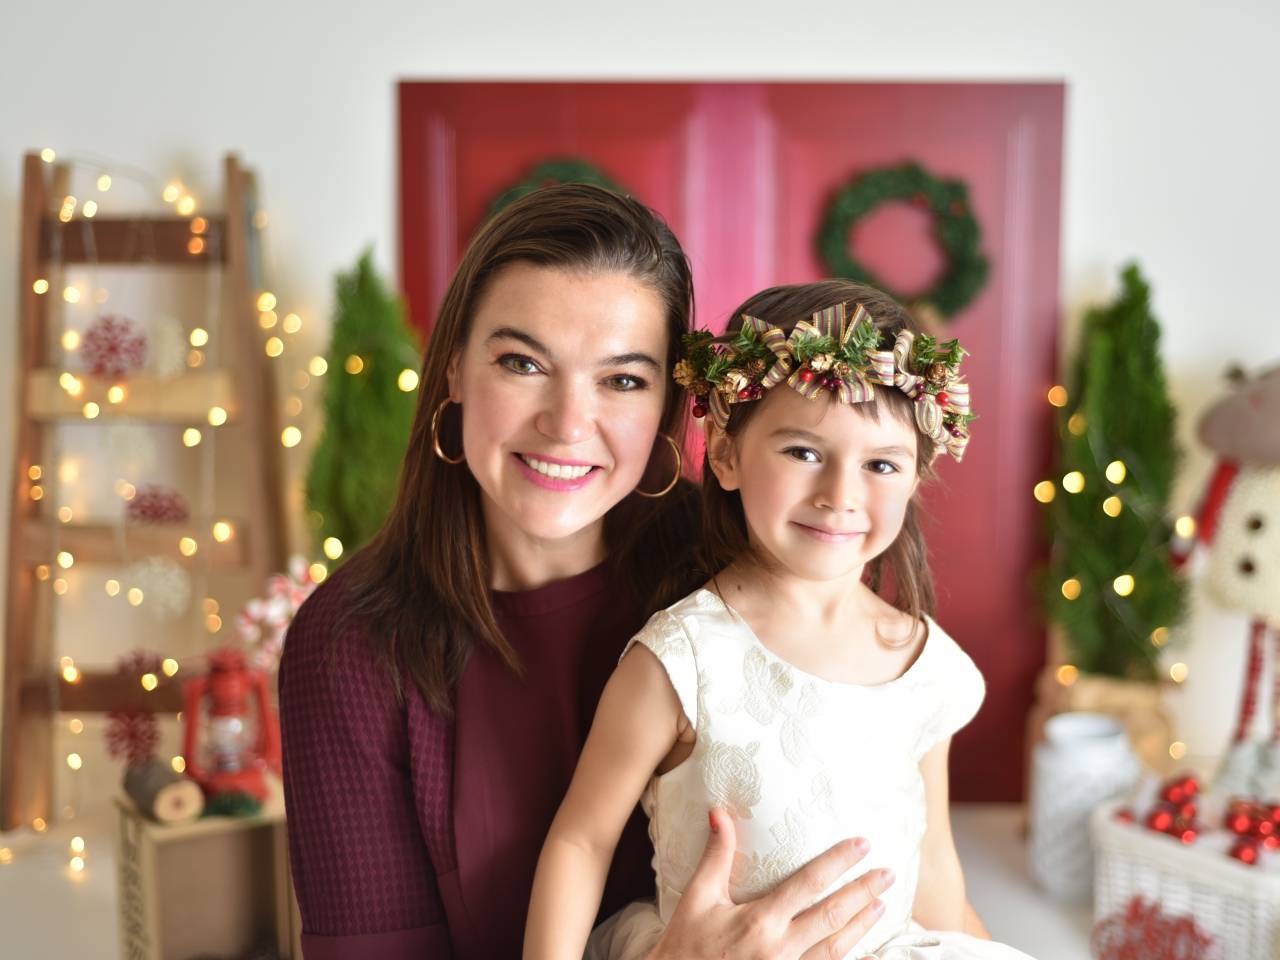 Smiling mother and young daughter surrounded by Christmas decorations